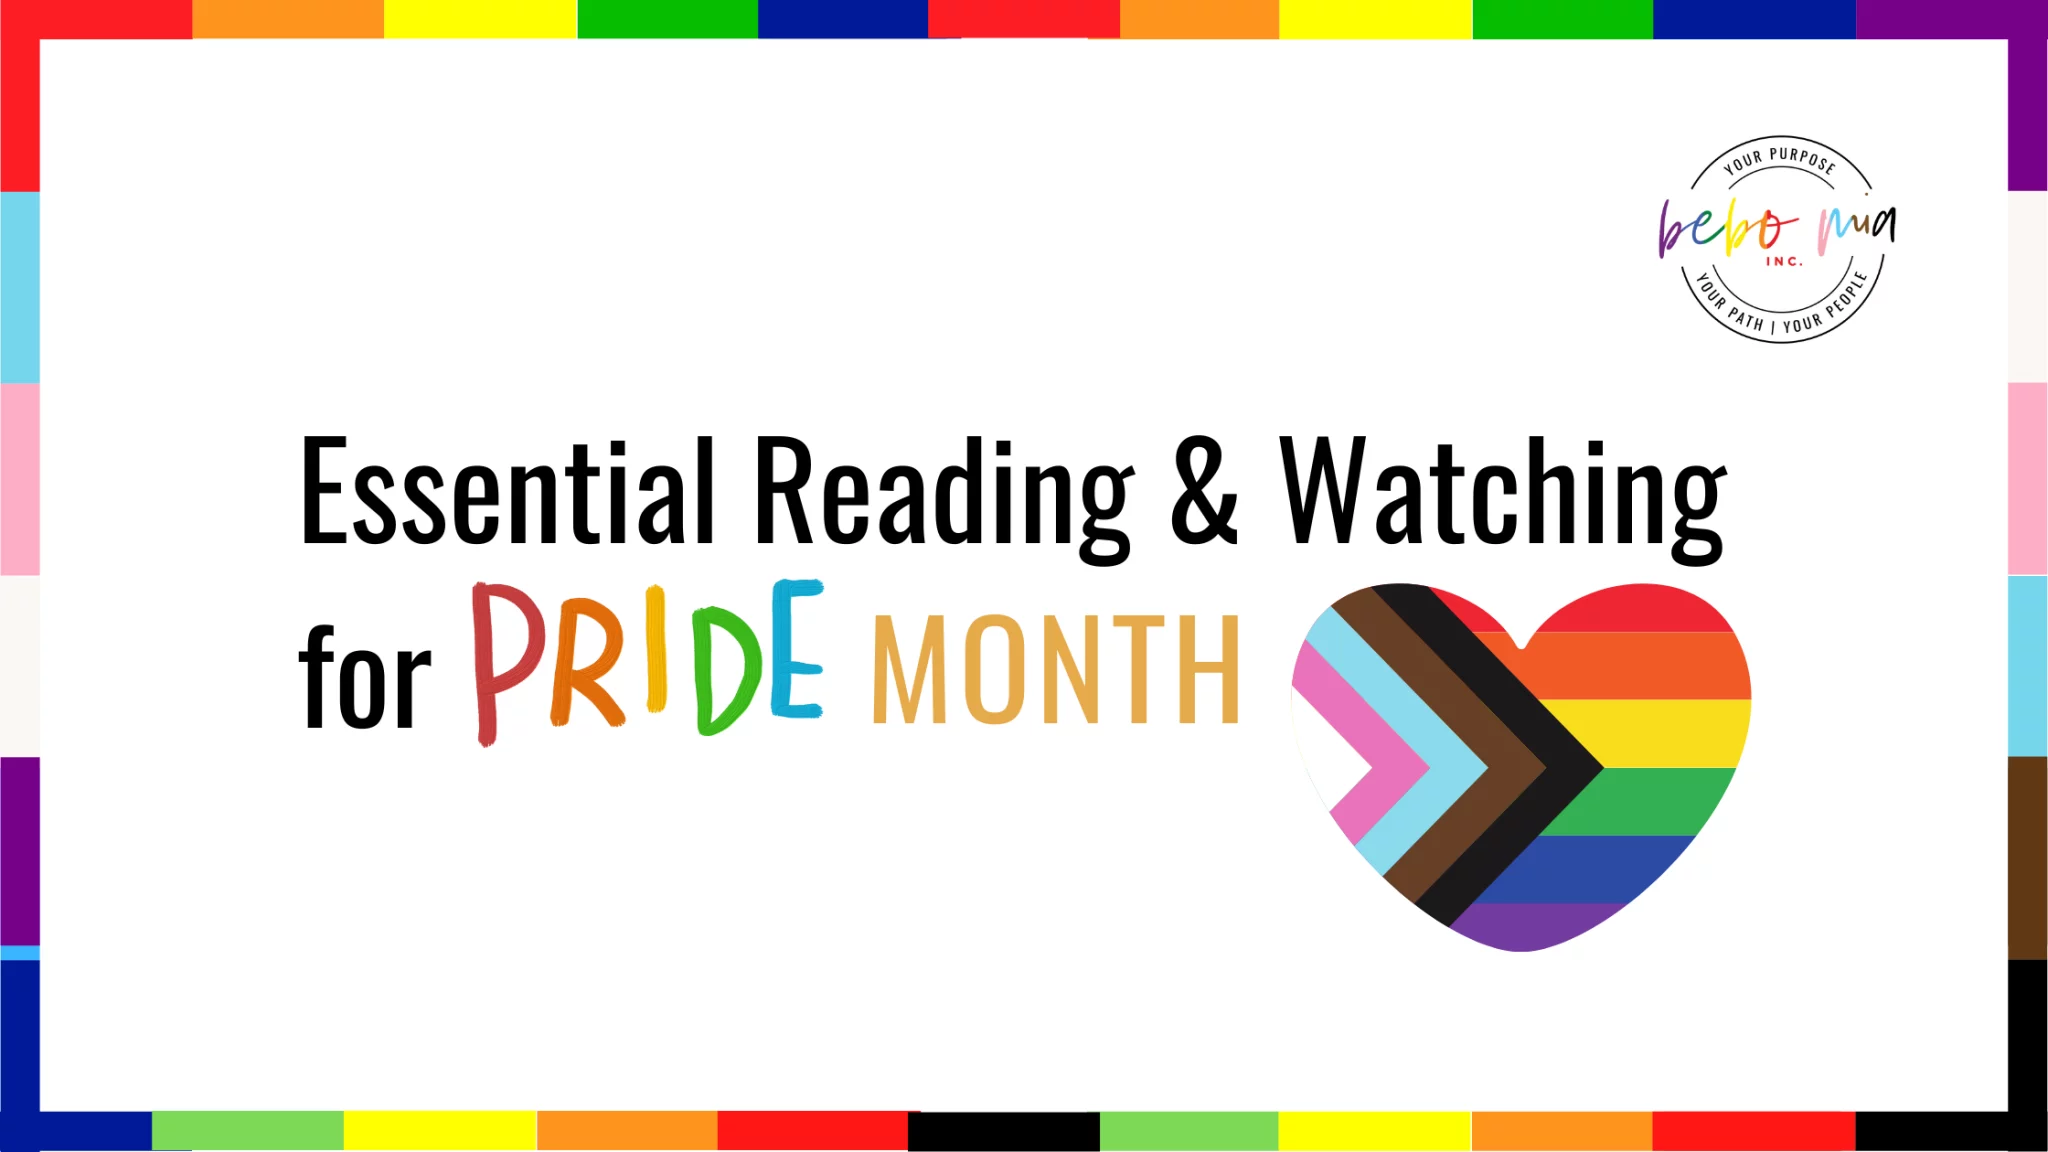 Essential Reading & Watching for Pride Month